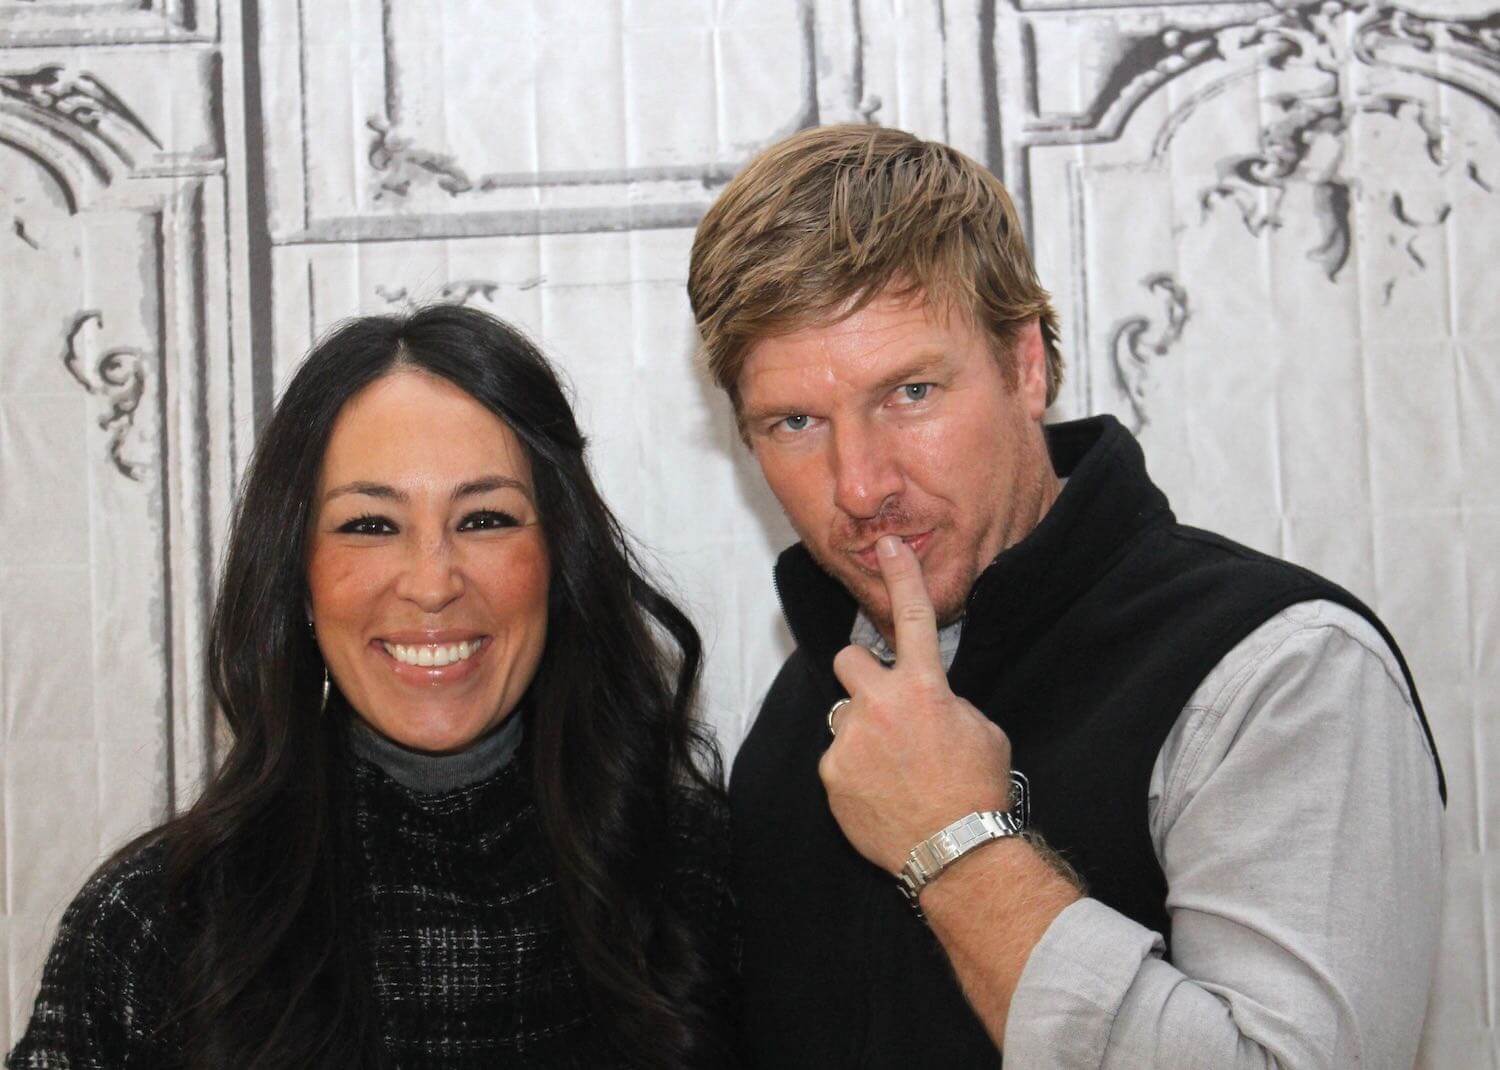 Hotel 1928 owners Chip and Joanna Gaines posing for the camera